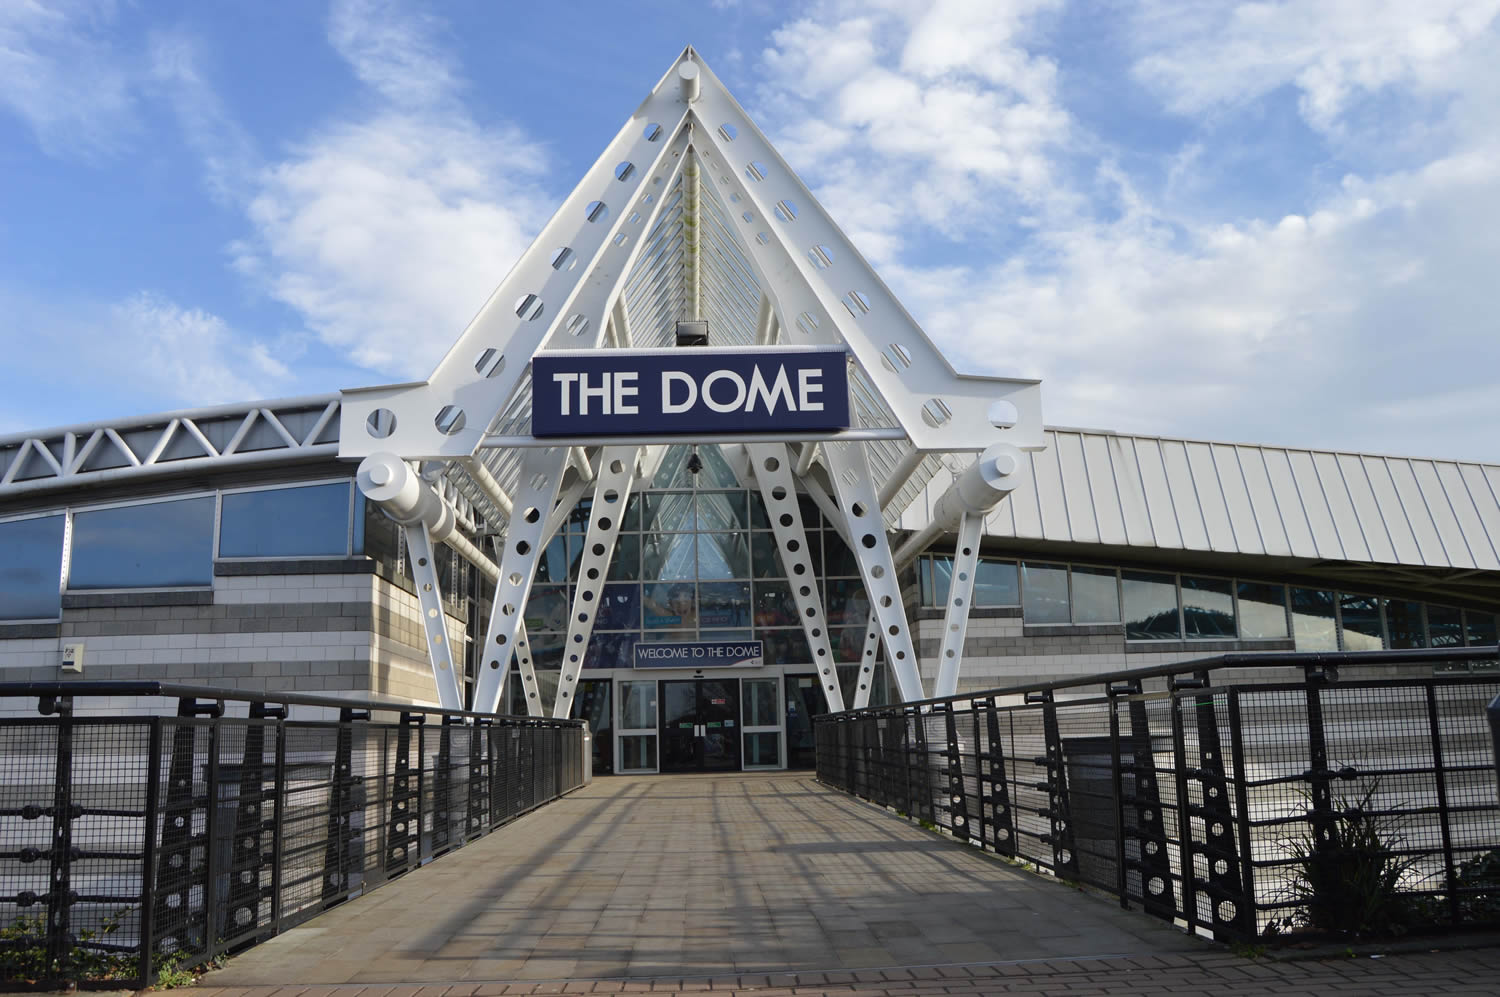 Image name Doncaster Dome the 3 image from the post Visitor Attractions in Yorkshire.com.